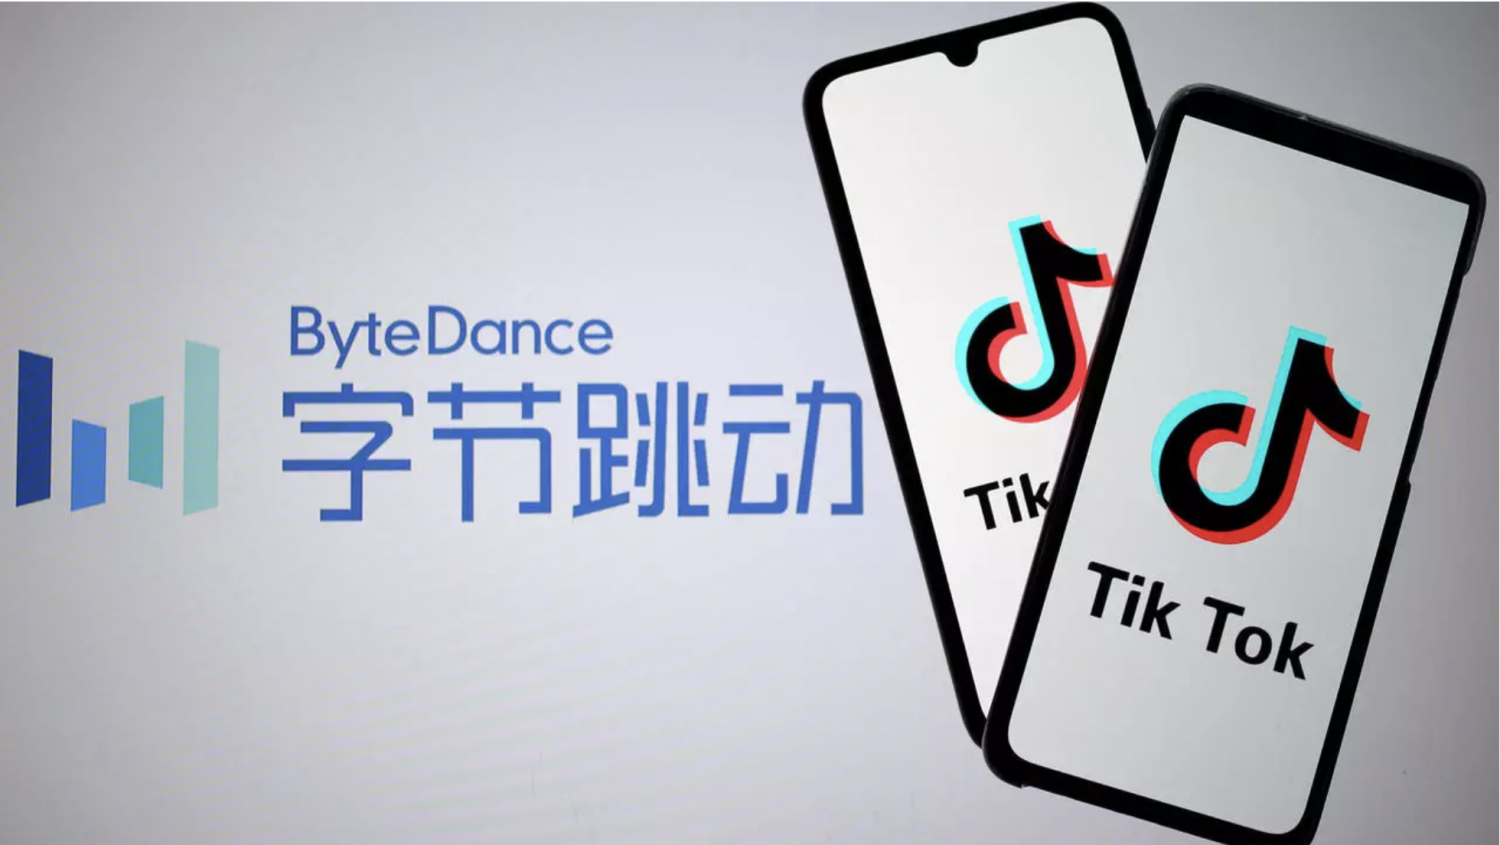 TikTok logos are seen on smartphones in front of a displayed ByteDance logo in this illustration taken November 27, 2019. © Dado Ruvic, REUTERS